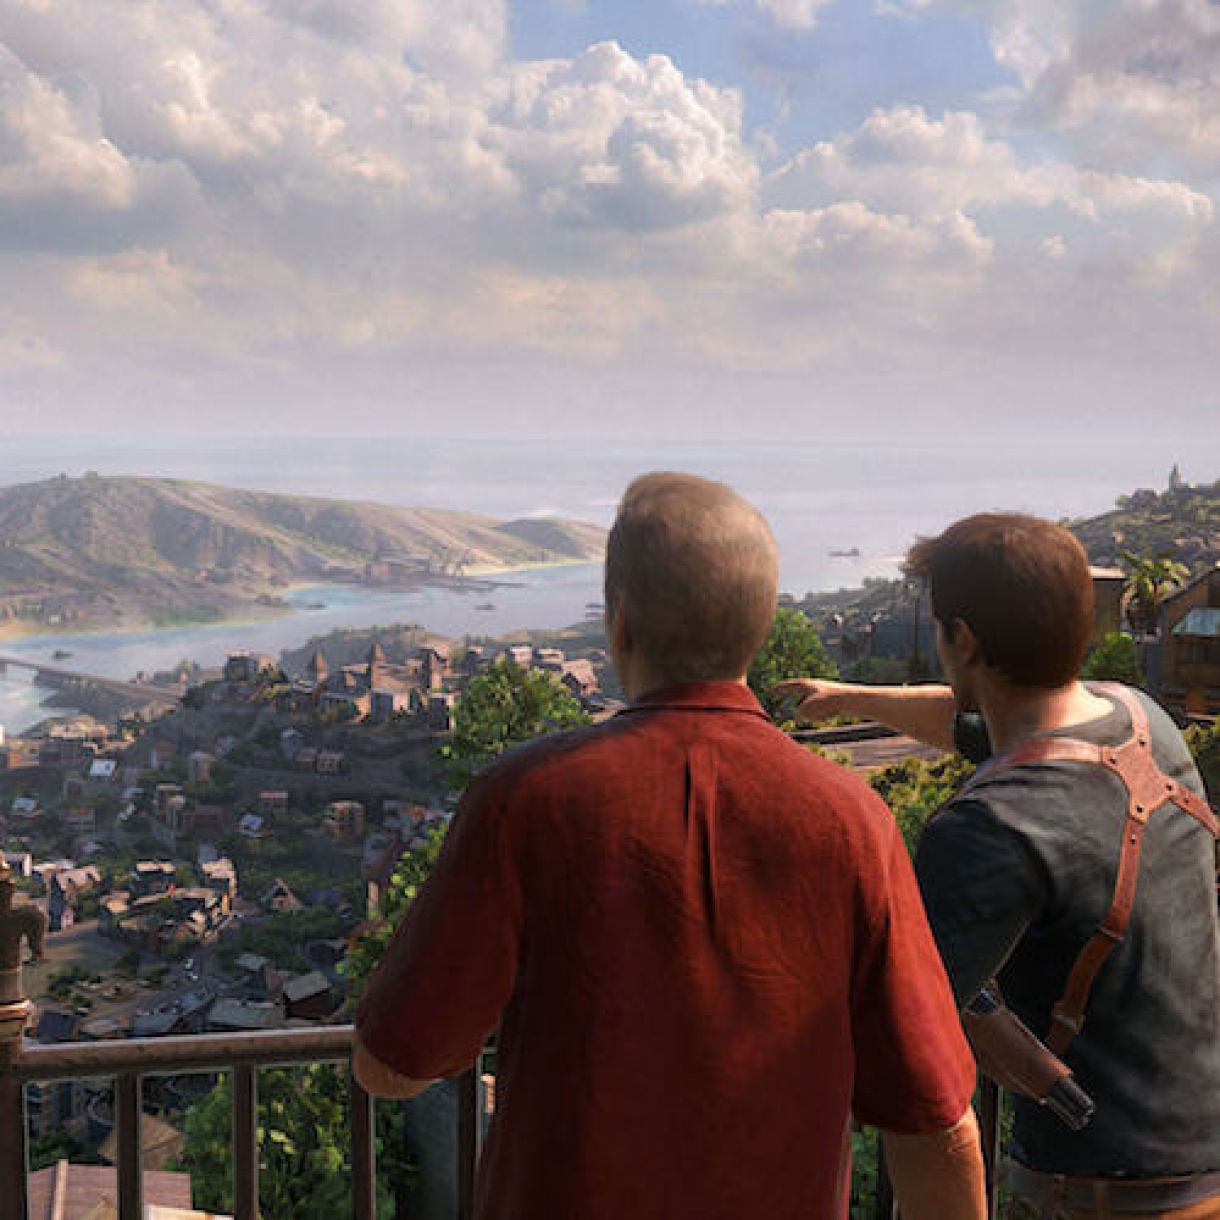 Uncharted 4 had some of the best graphics I've ever seen :) : r/gaming